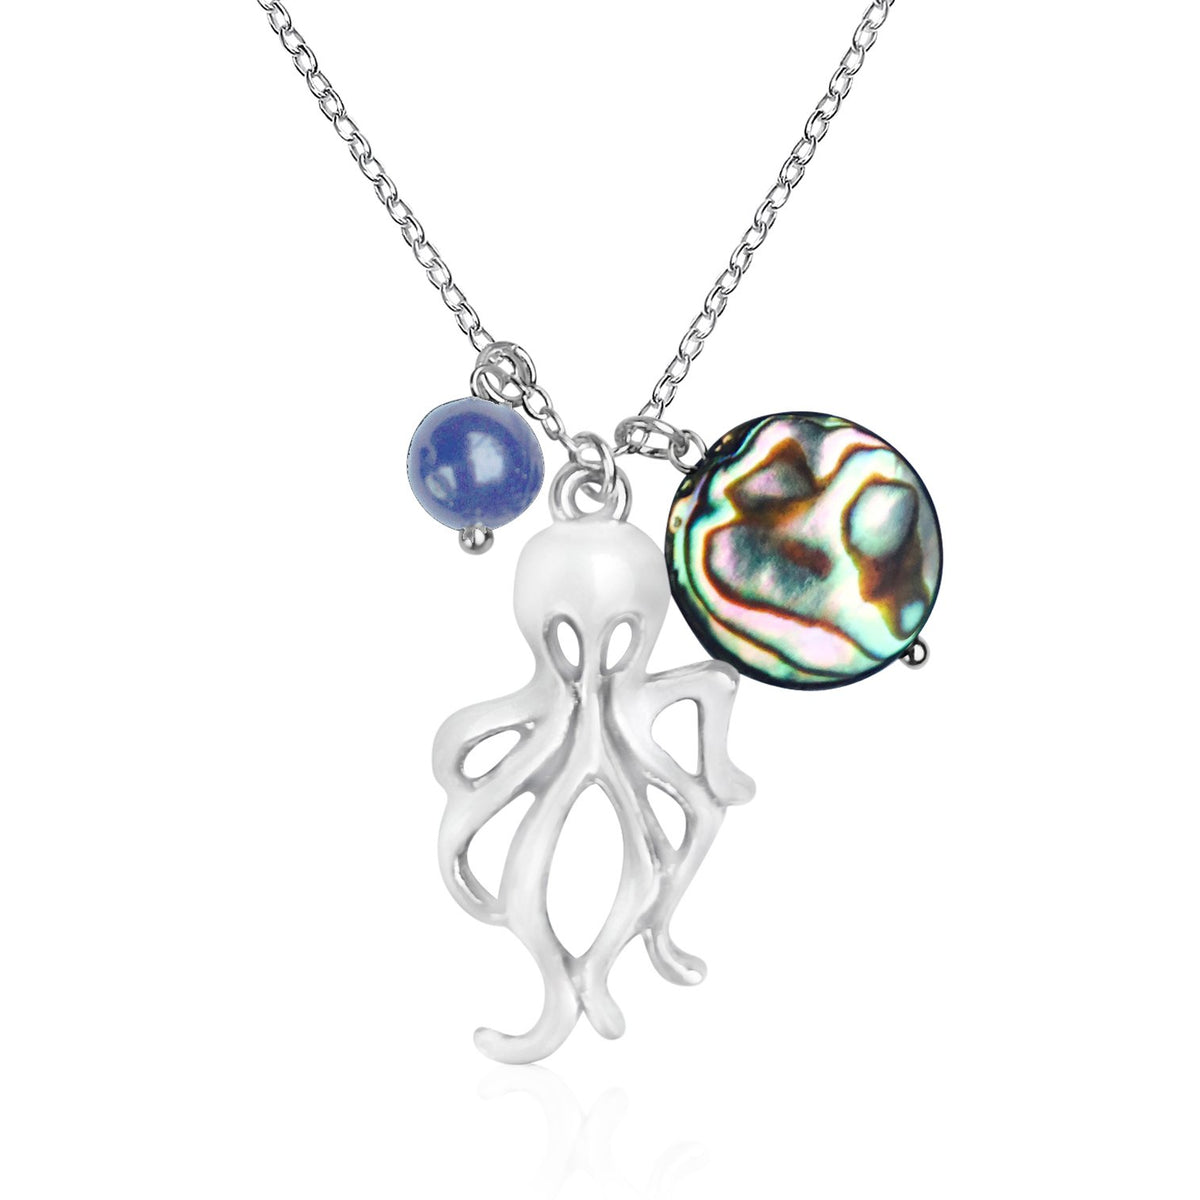 Octopus Silver EP Ocean Charm Necklace with Abalone and Lapis Lazuli Charms on Silver Necklace